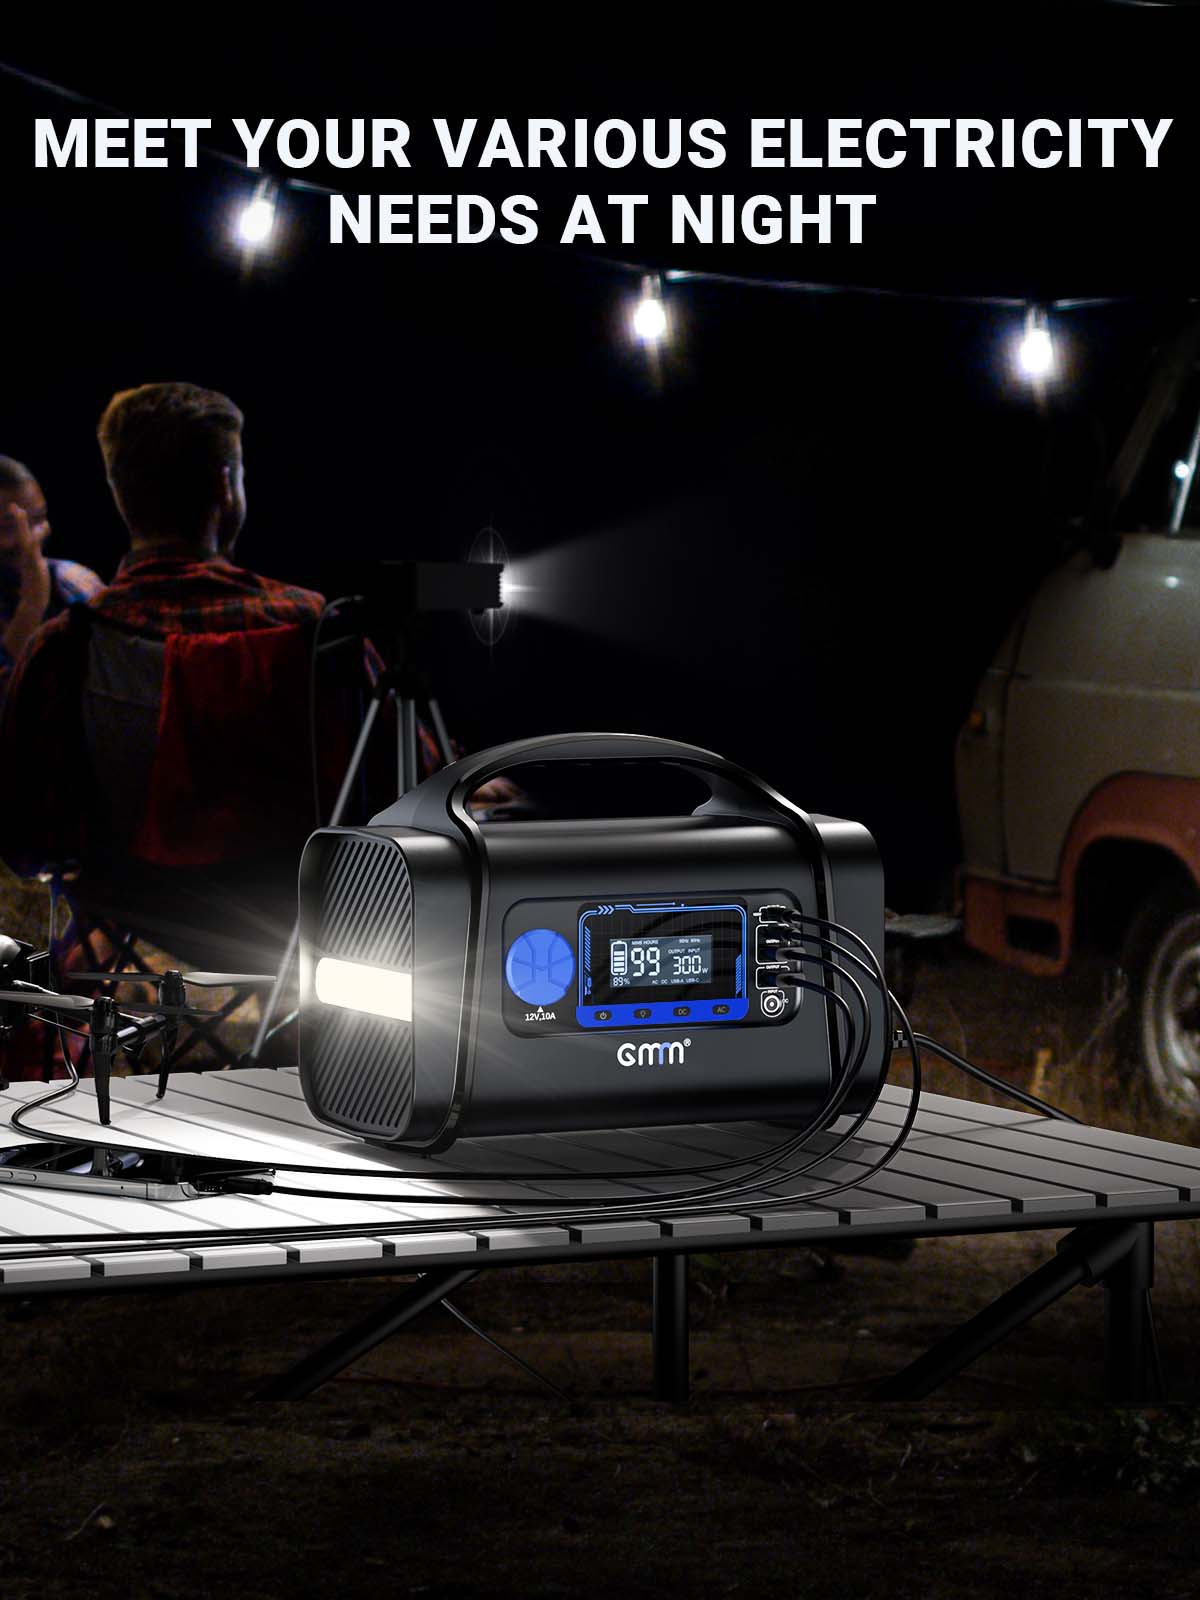 GMM 300W Portable Power Station 296Wh for Outdoors Camping Travel